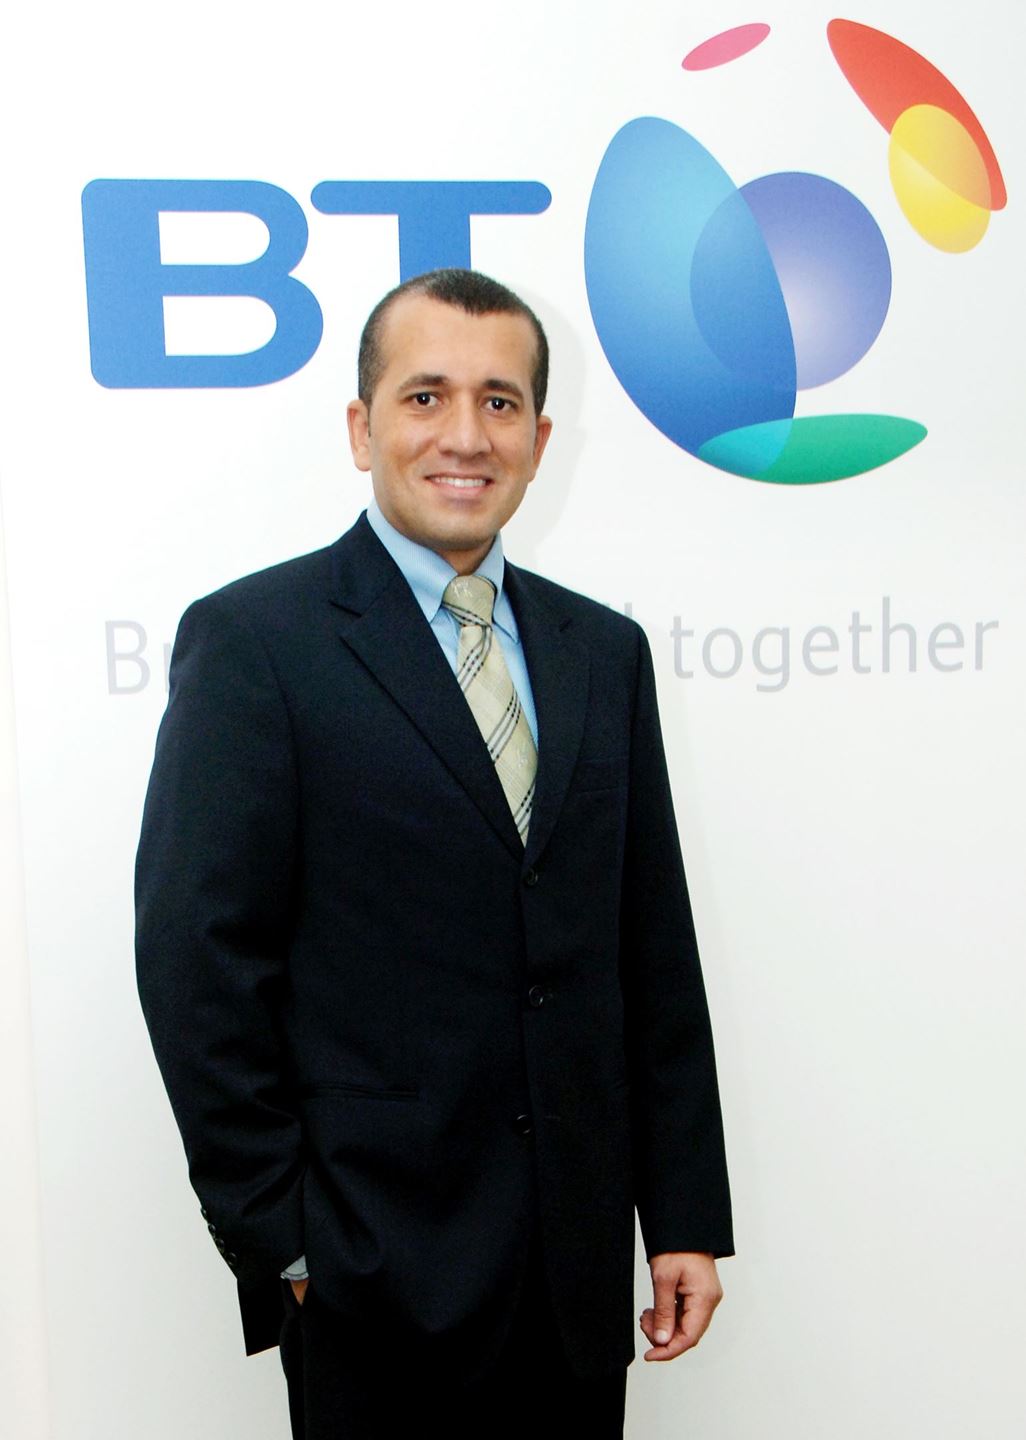 Mr. Wael El Kabbany, Vice President, Middle East and North Africa, BT